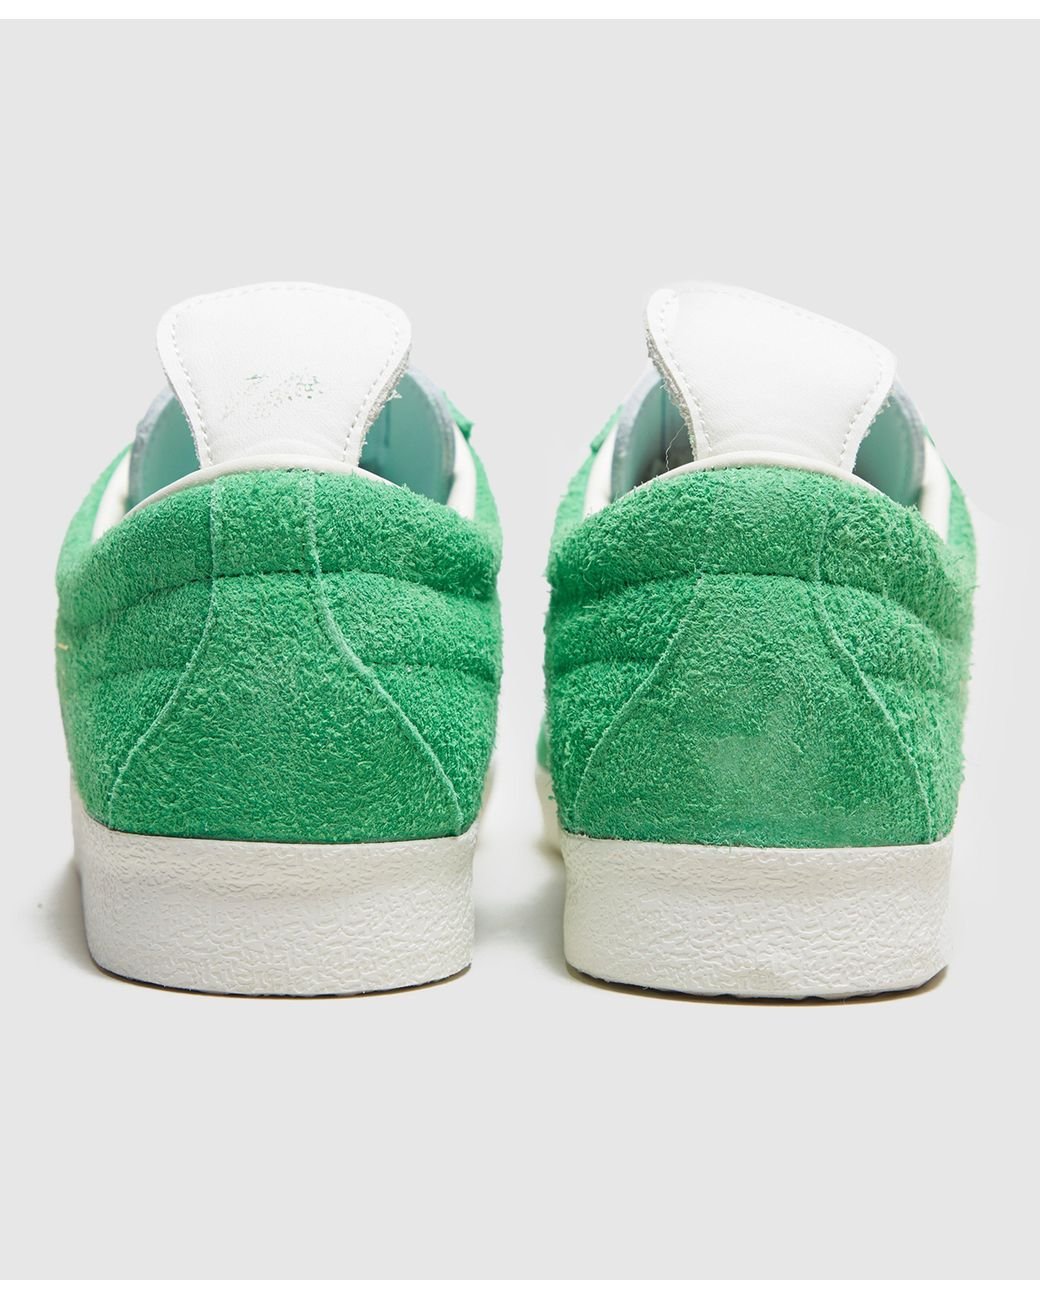 adidas Originals Lace Gazelle Vintage Trainers in Green | Lyst Canada